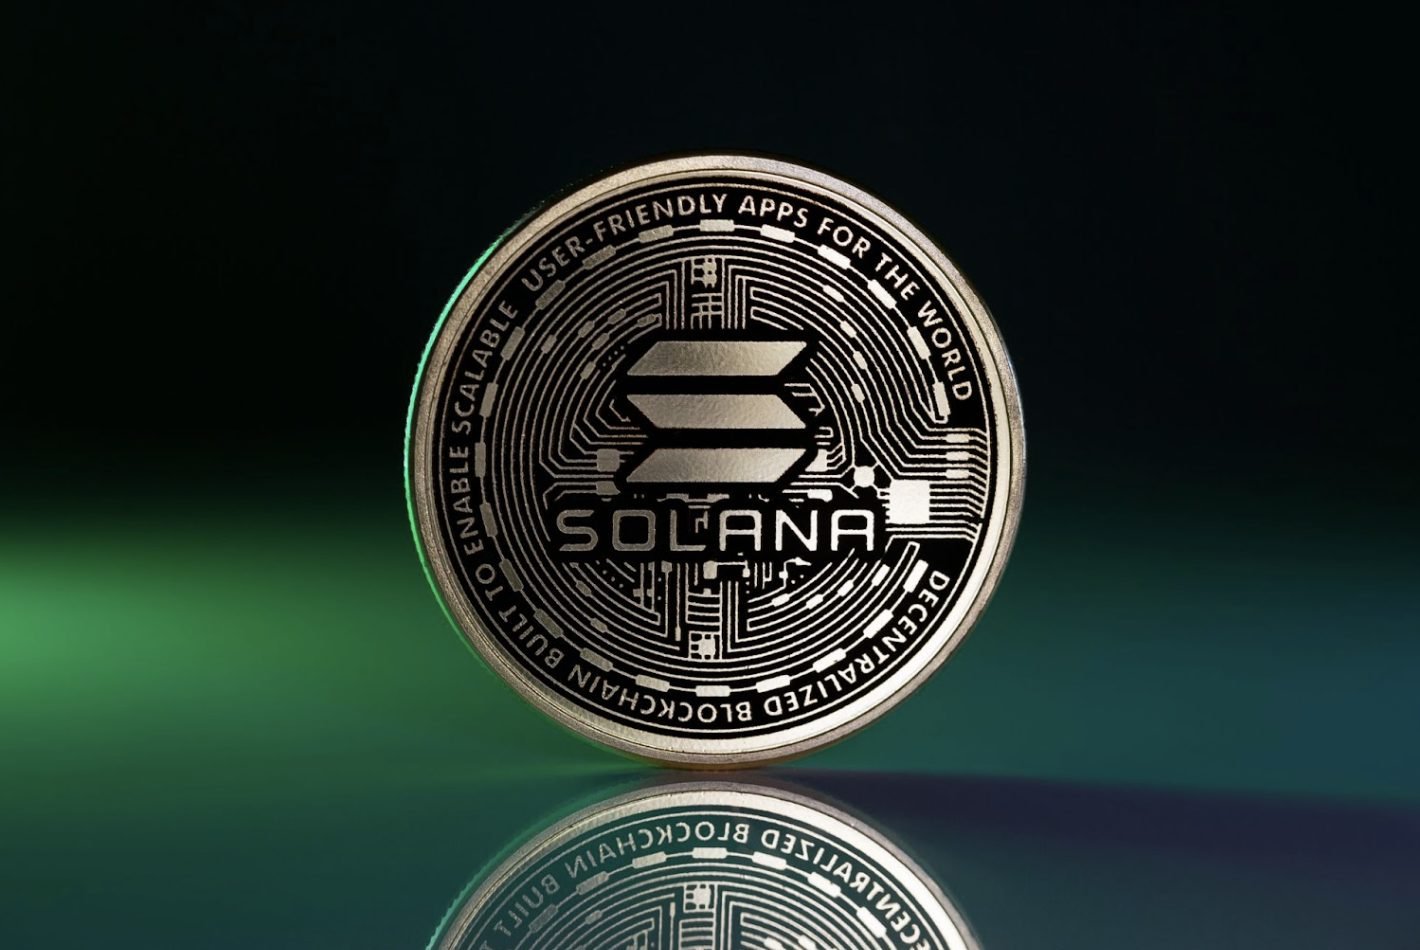 Solana Takes the Lead in Weekend Crypto Trading, Beating Out Bitcoin and Ethereum